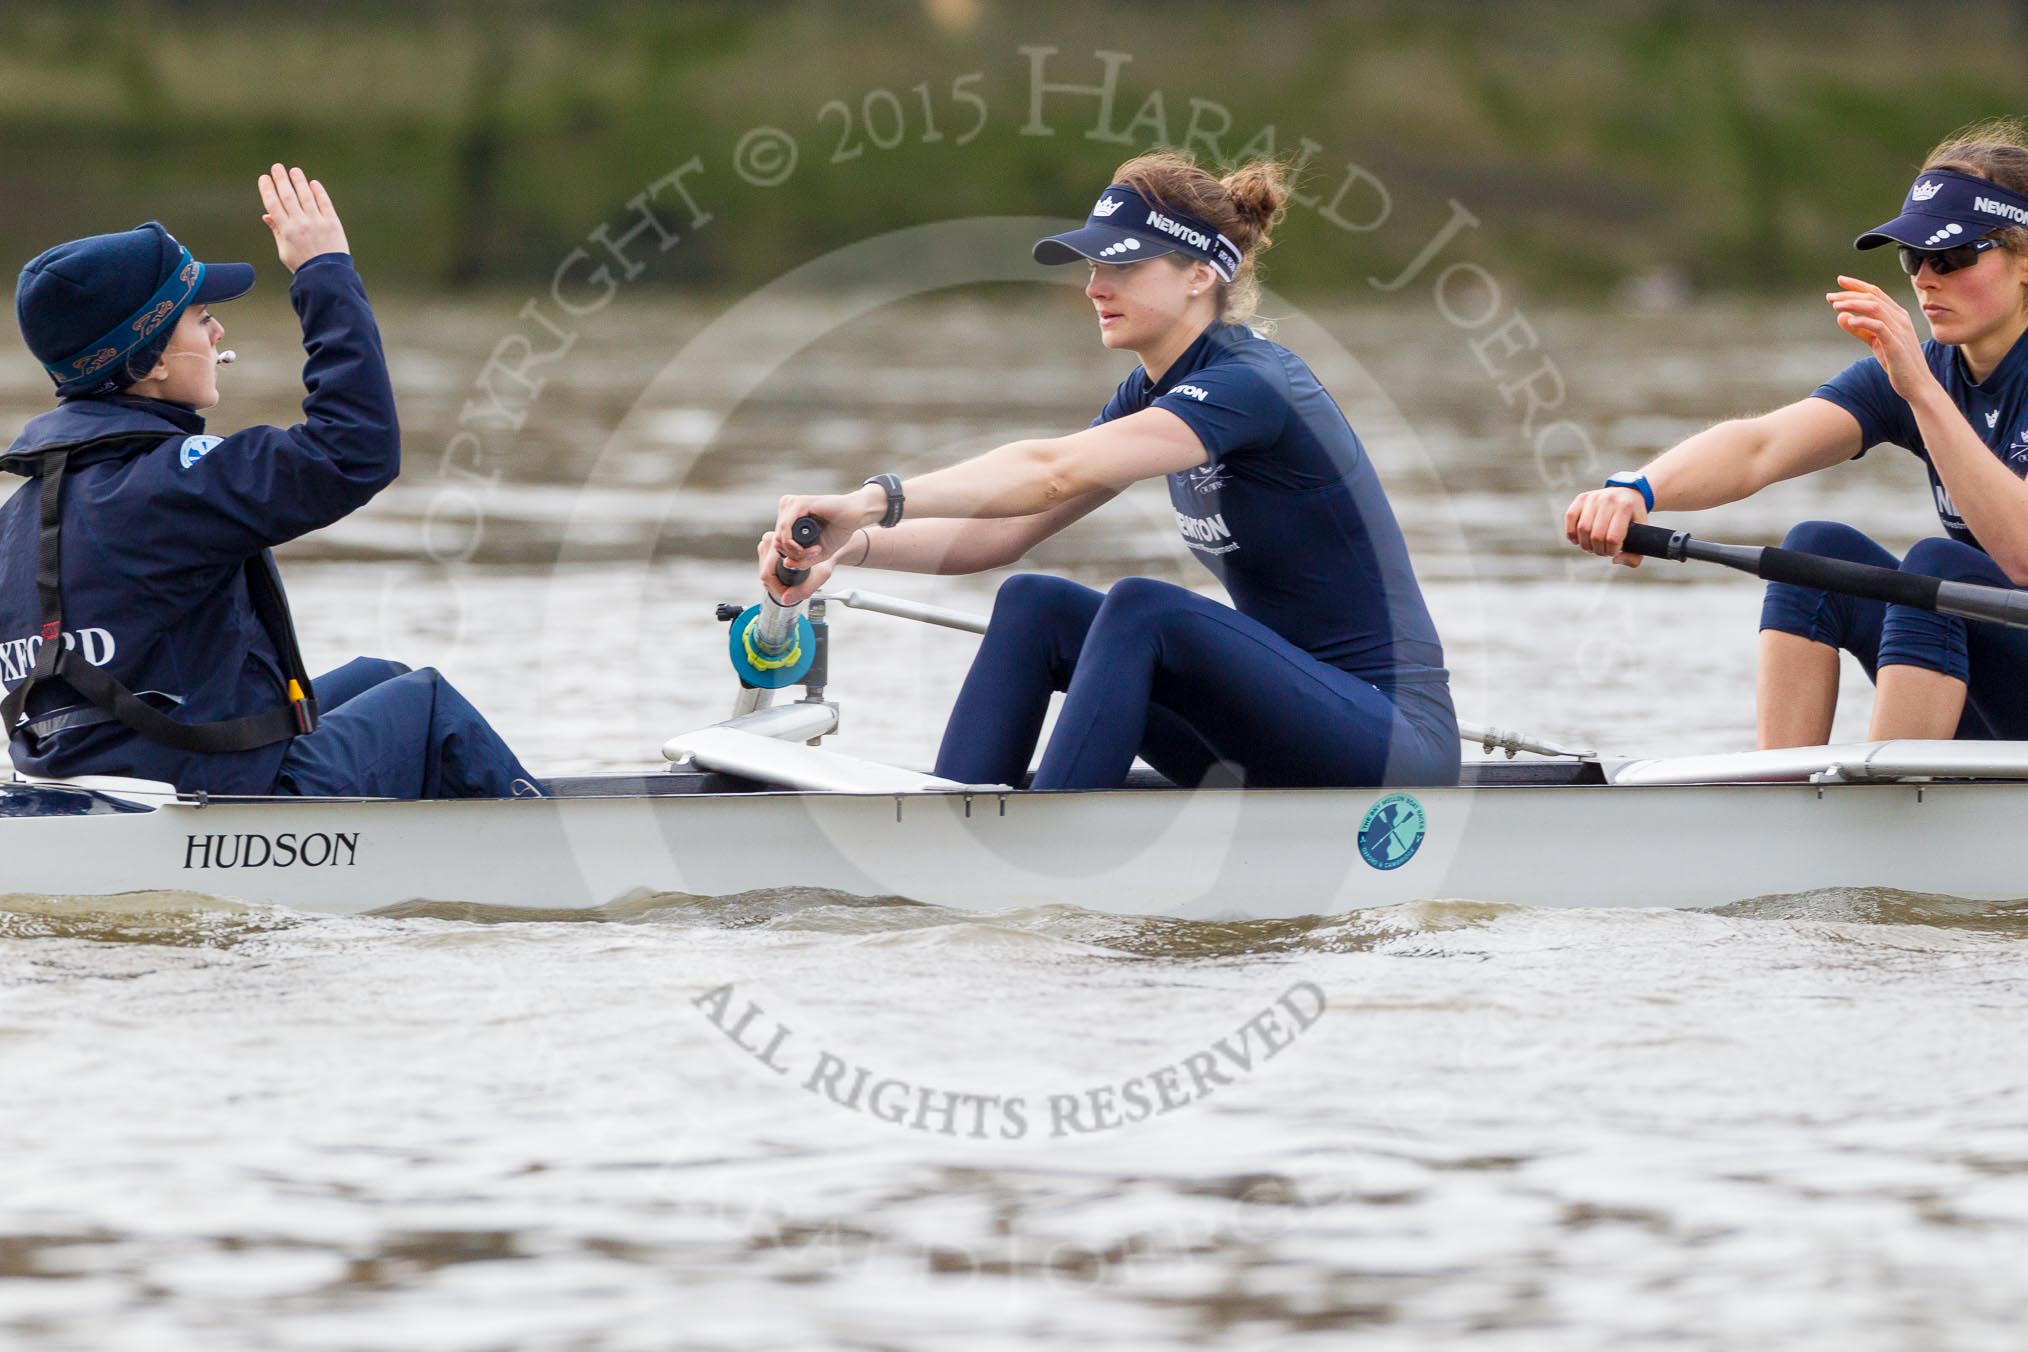 The Boat Race season 2016 - Women's Boat Race Trial Eights (OUWBC, Oxford): "Scylla" ready for the start of the race, here cox-Antonia Stutter, stroke-Emma Lukasiewicz, 7-Lauren Kedar.
River Thames between Putney Bridge and Mortlake,
London SW15,

United Kingdom,
on 10 December 2015 at 12:18, image #132